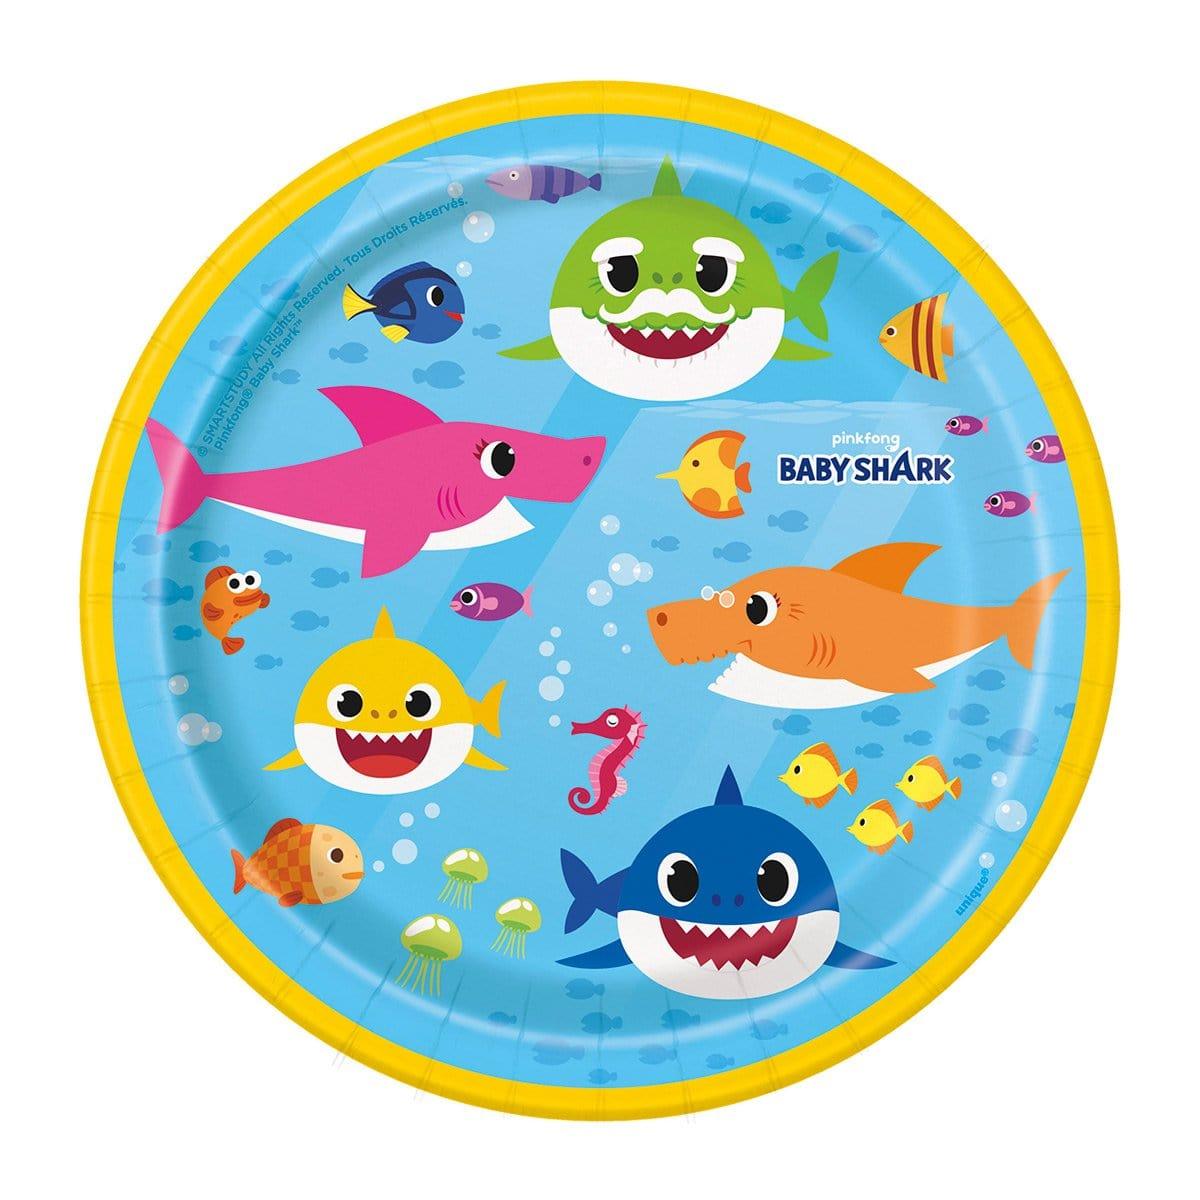 Buy Kids Birthday Baby Shark Dessert plates 7 inches, 8 per package sold at Party Expert